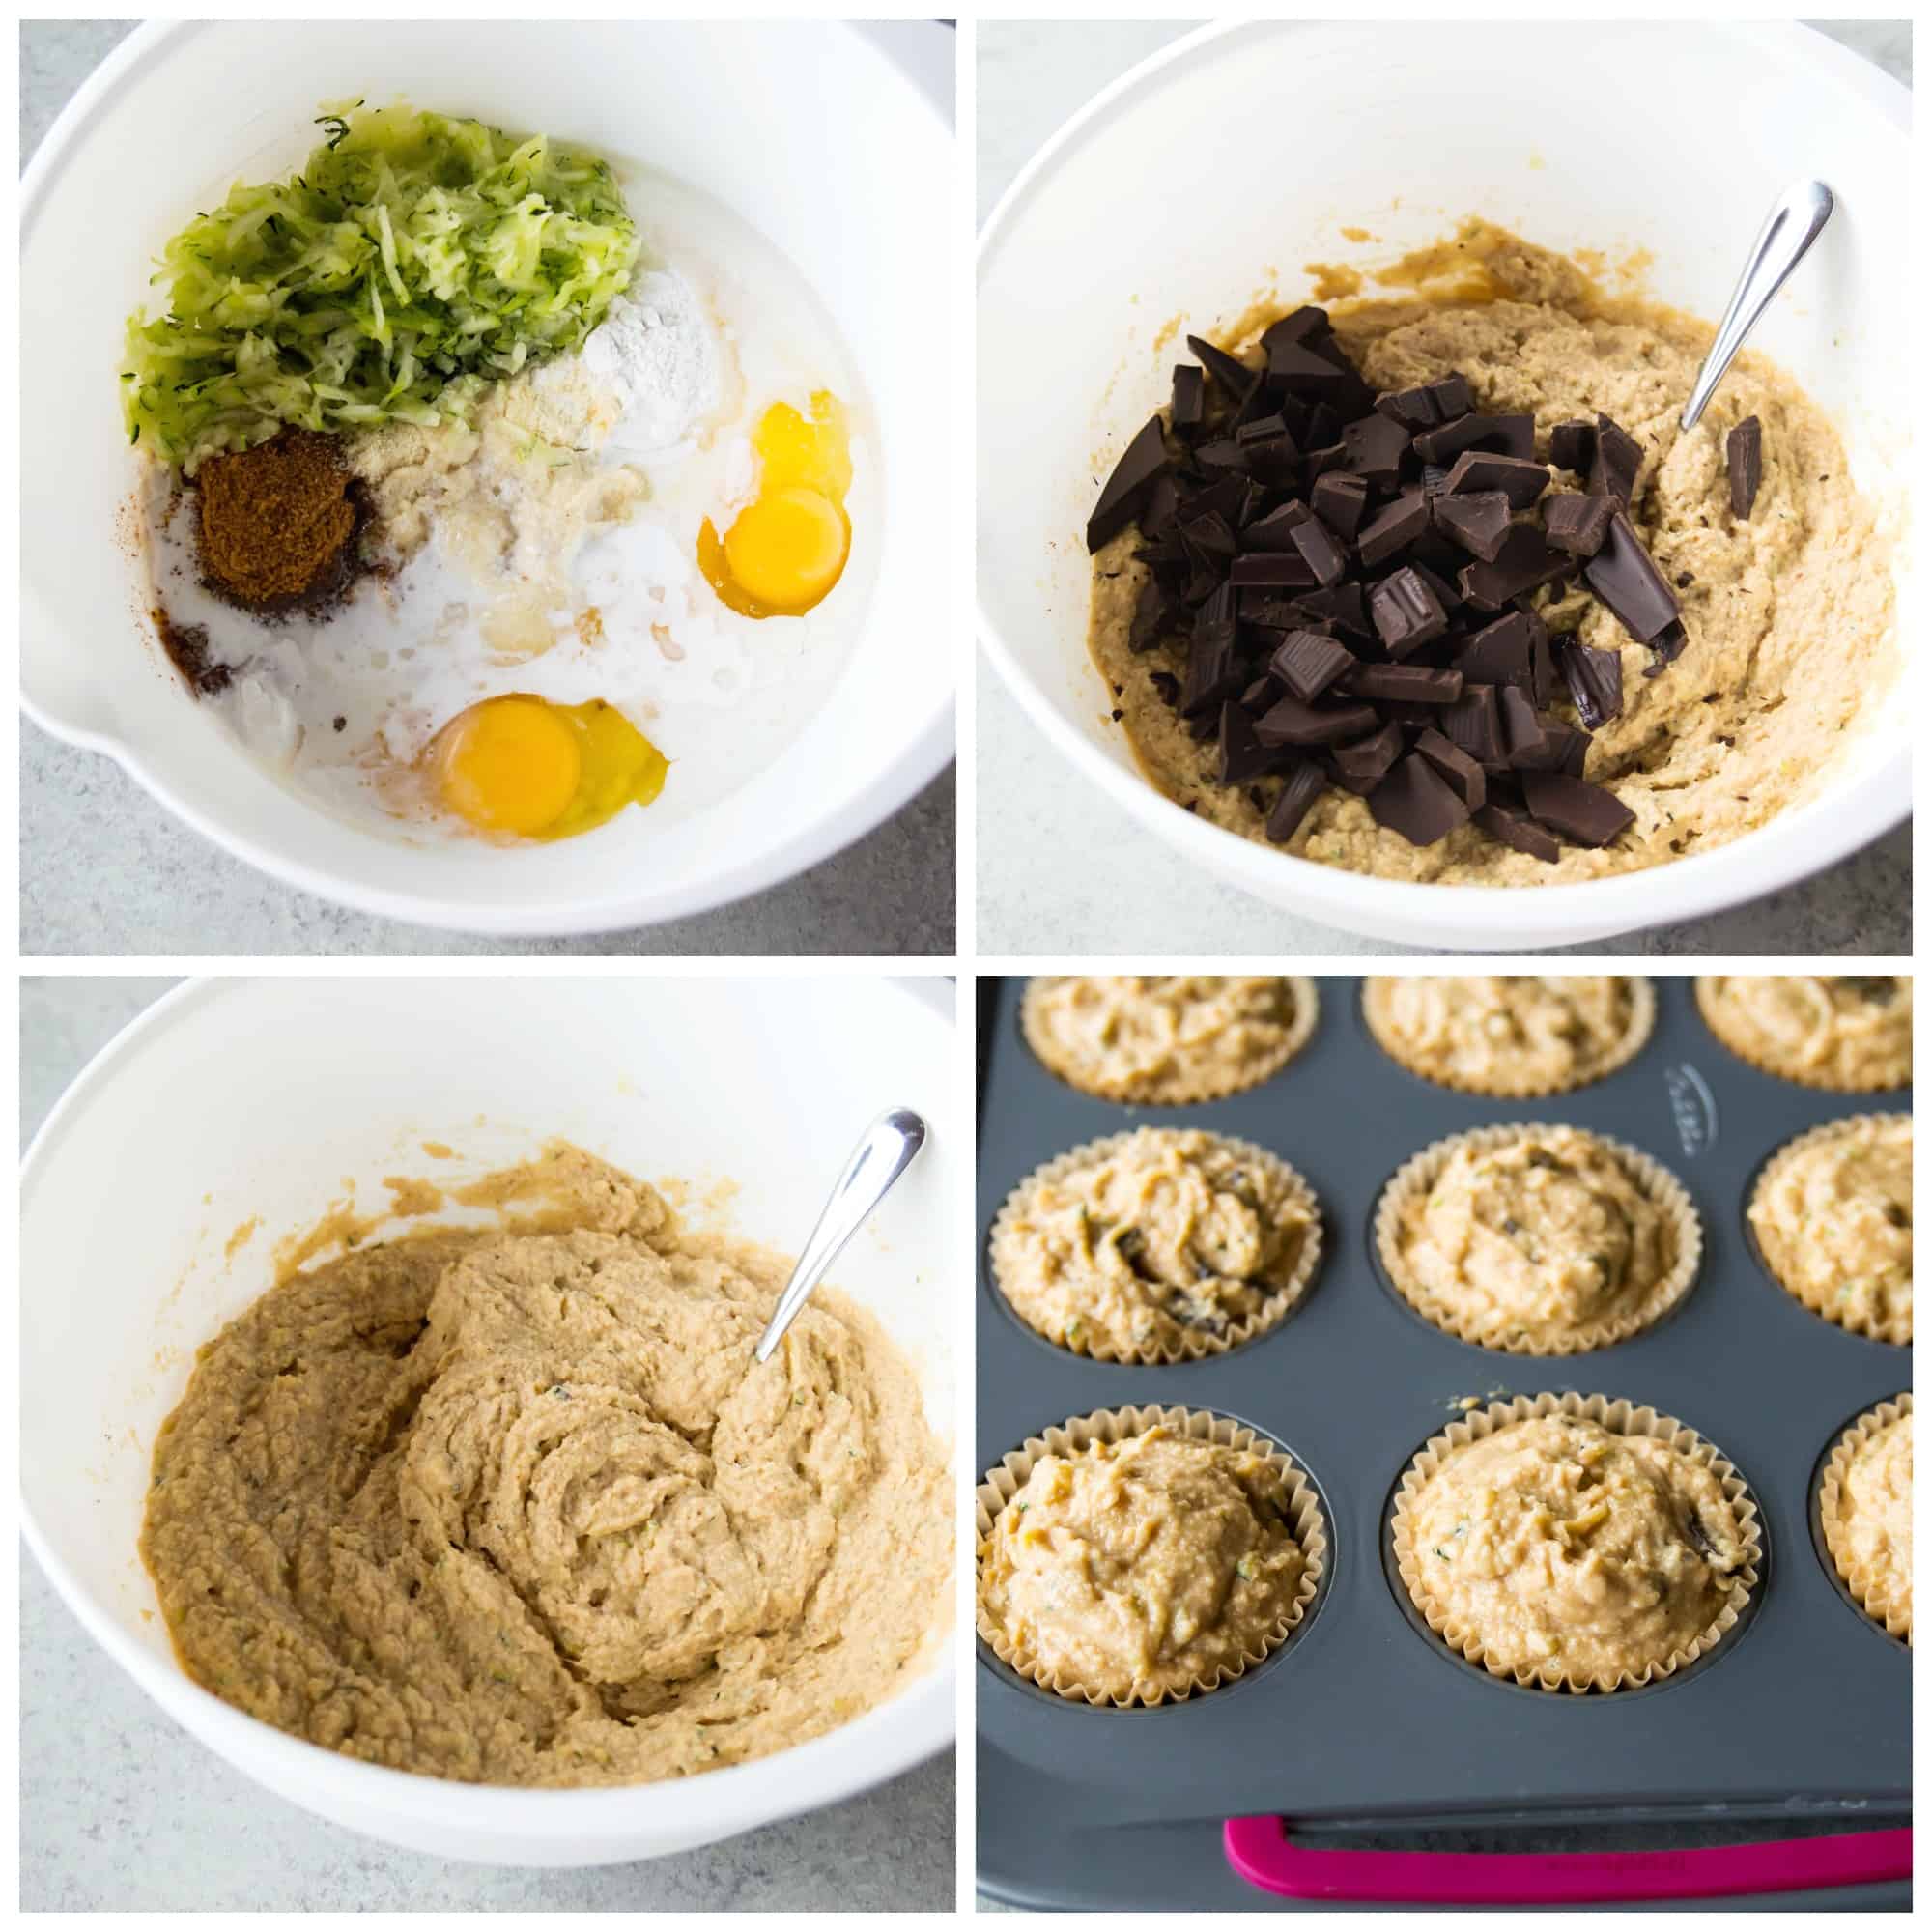 Step by step directions for making paleo zucchini muffins with chocolate.